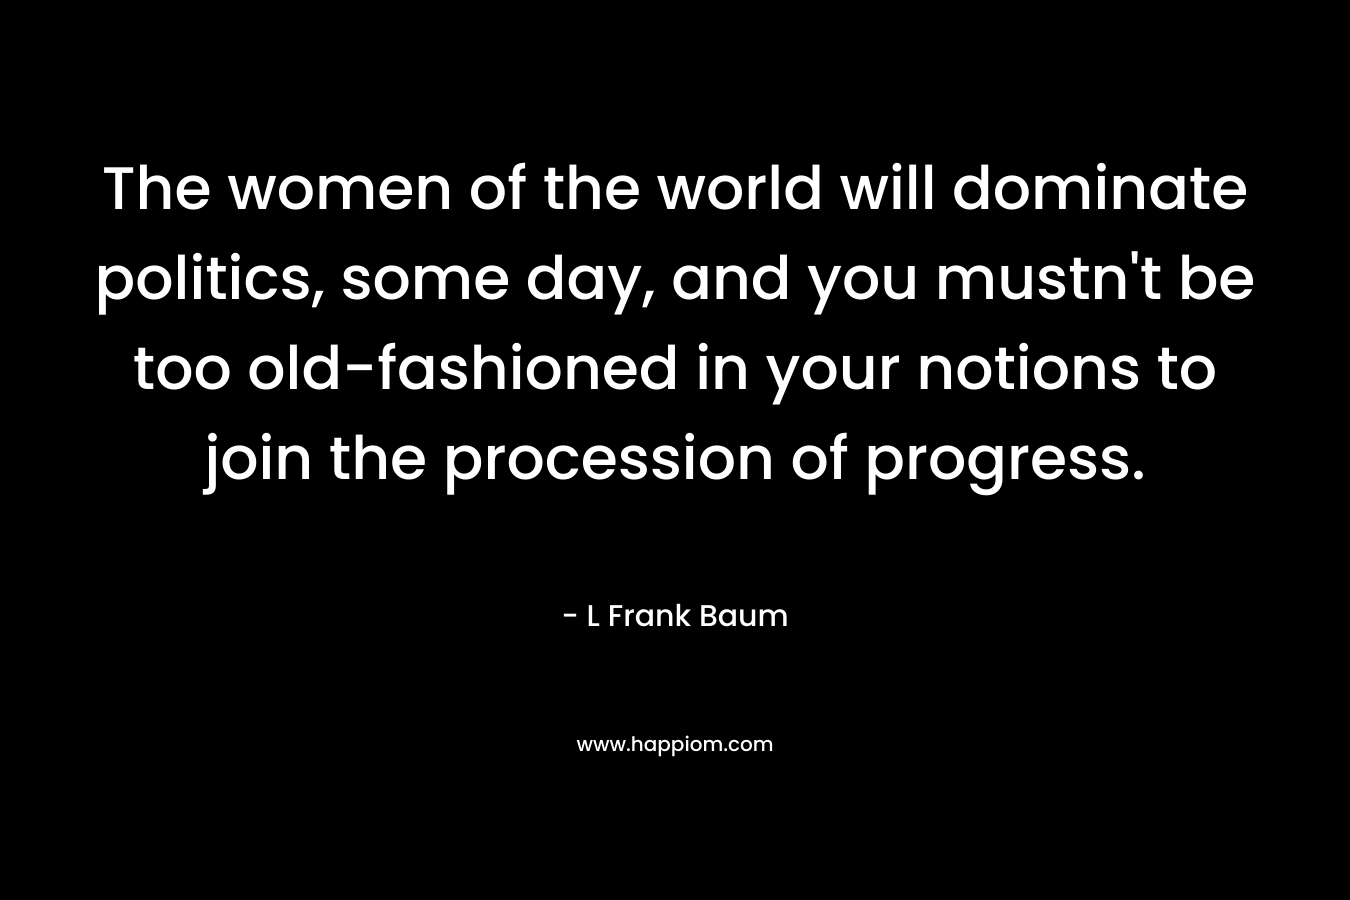 The women of the world will dominate politics, some day, and you mustn’t be too old-fashioned in your notions to join the procession of progress. – L Frank Baum